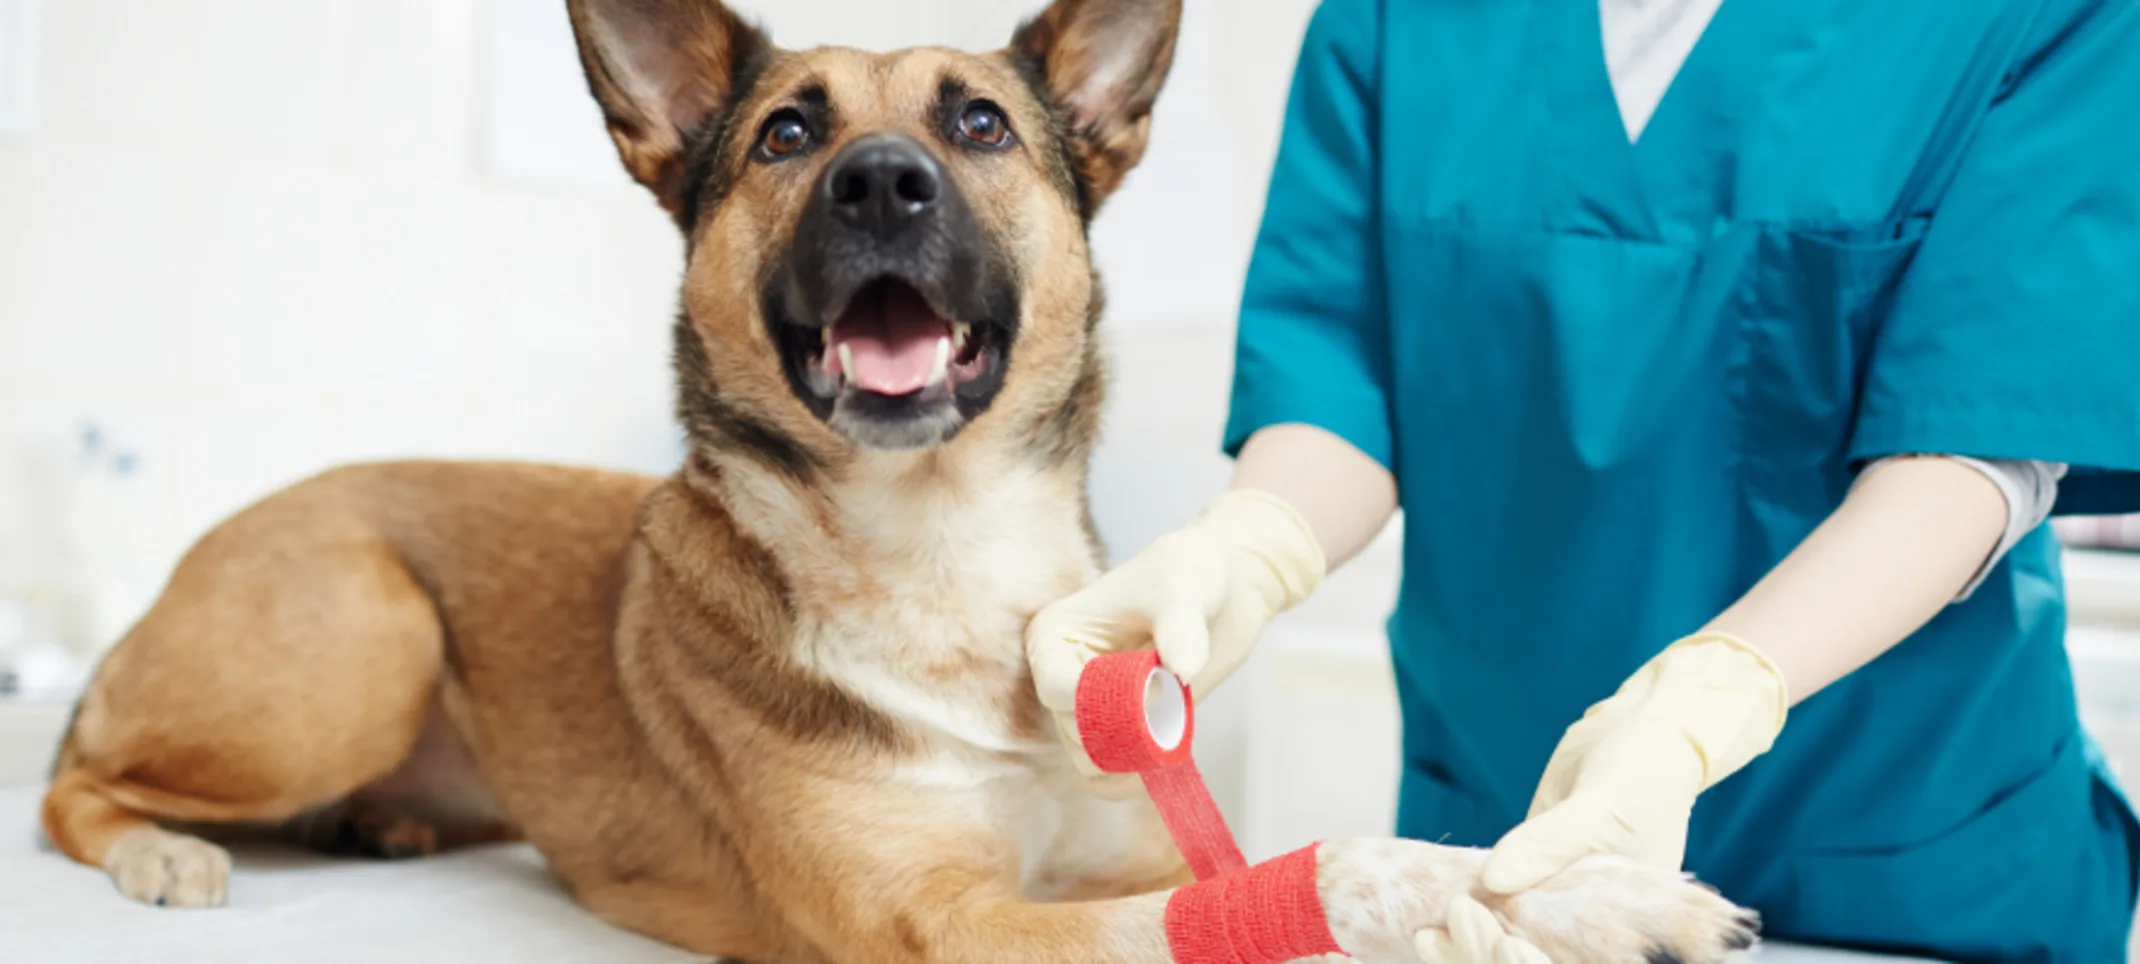 Staff wrapping red bandage on dog's paw